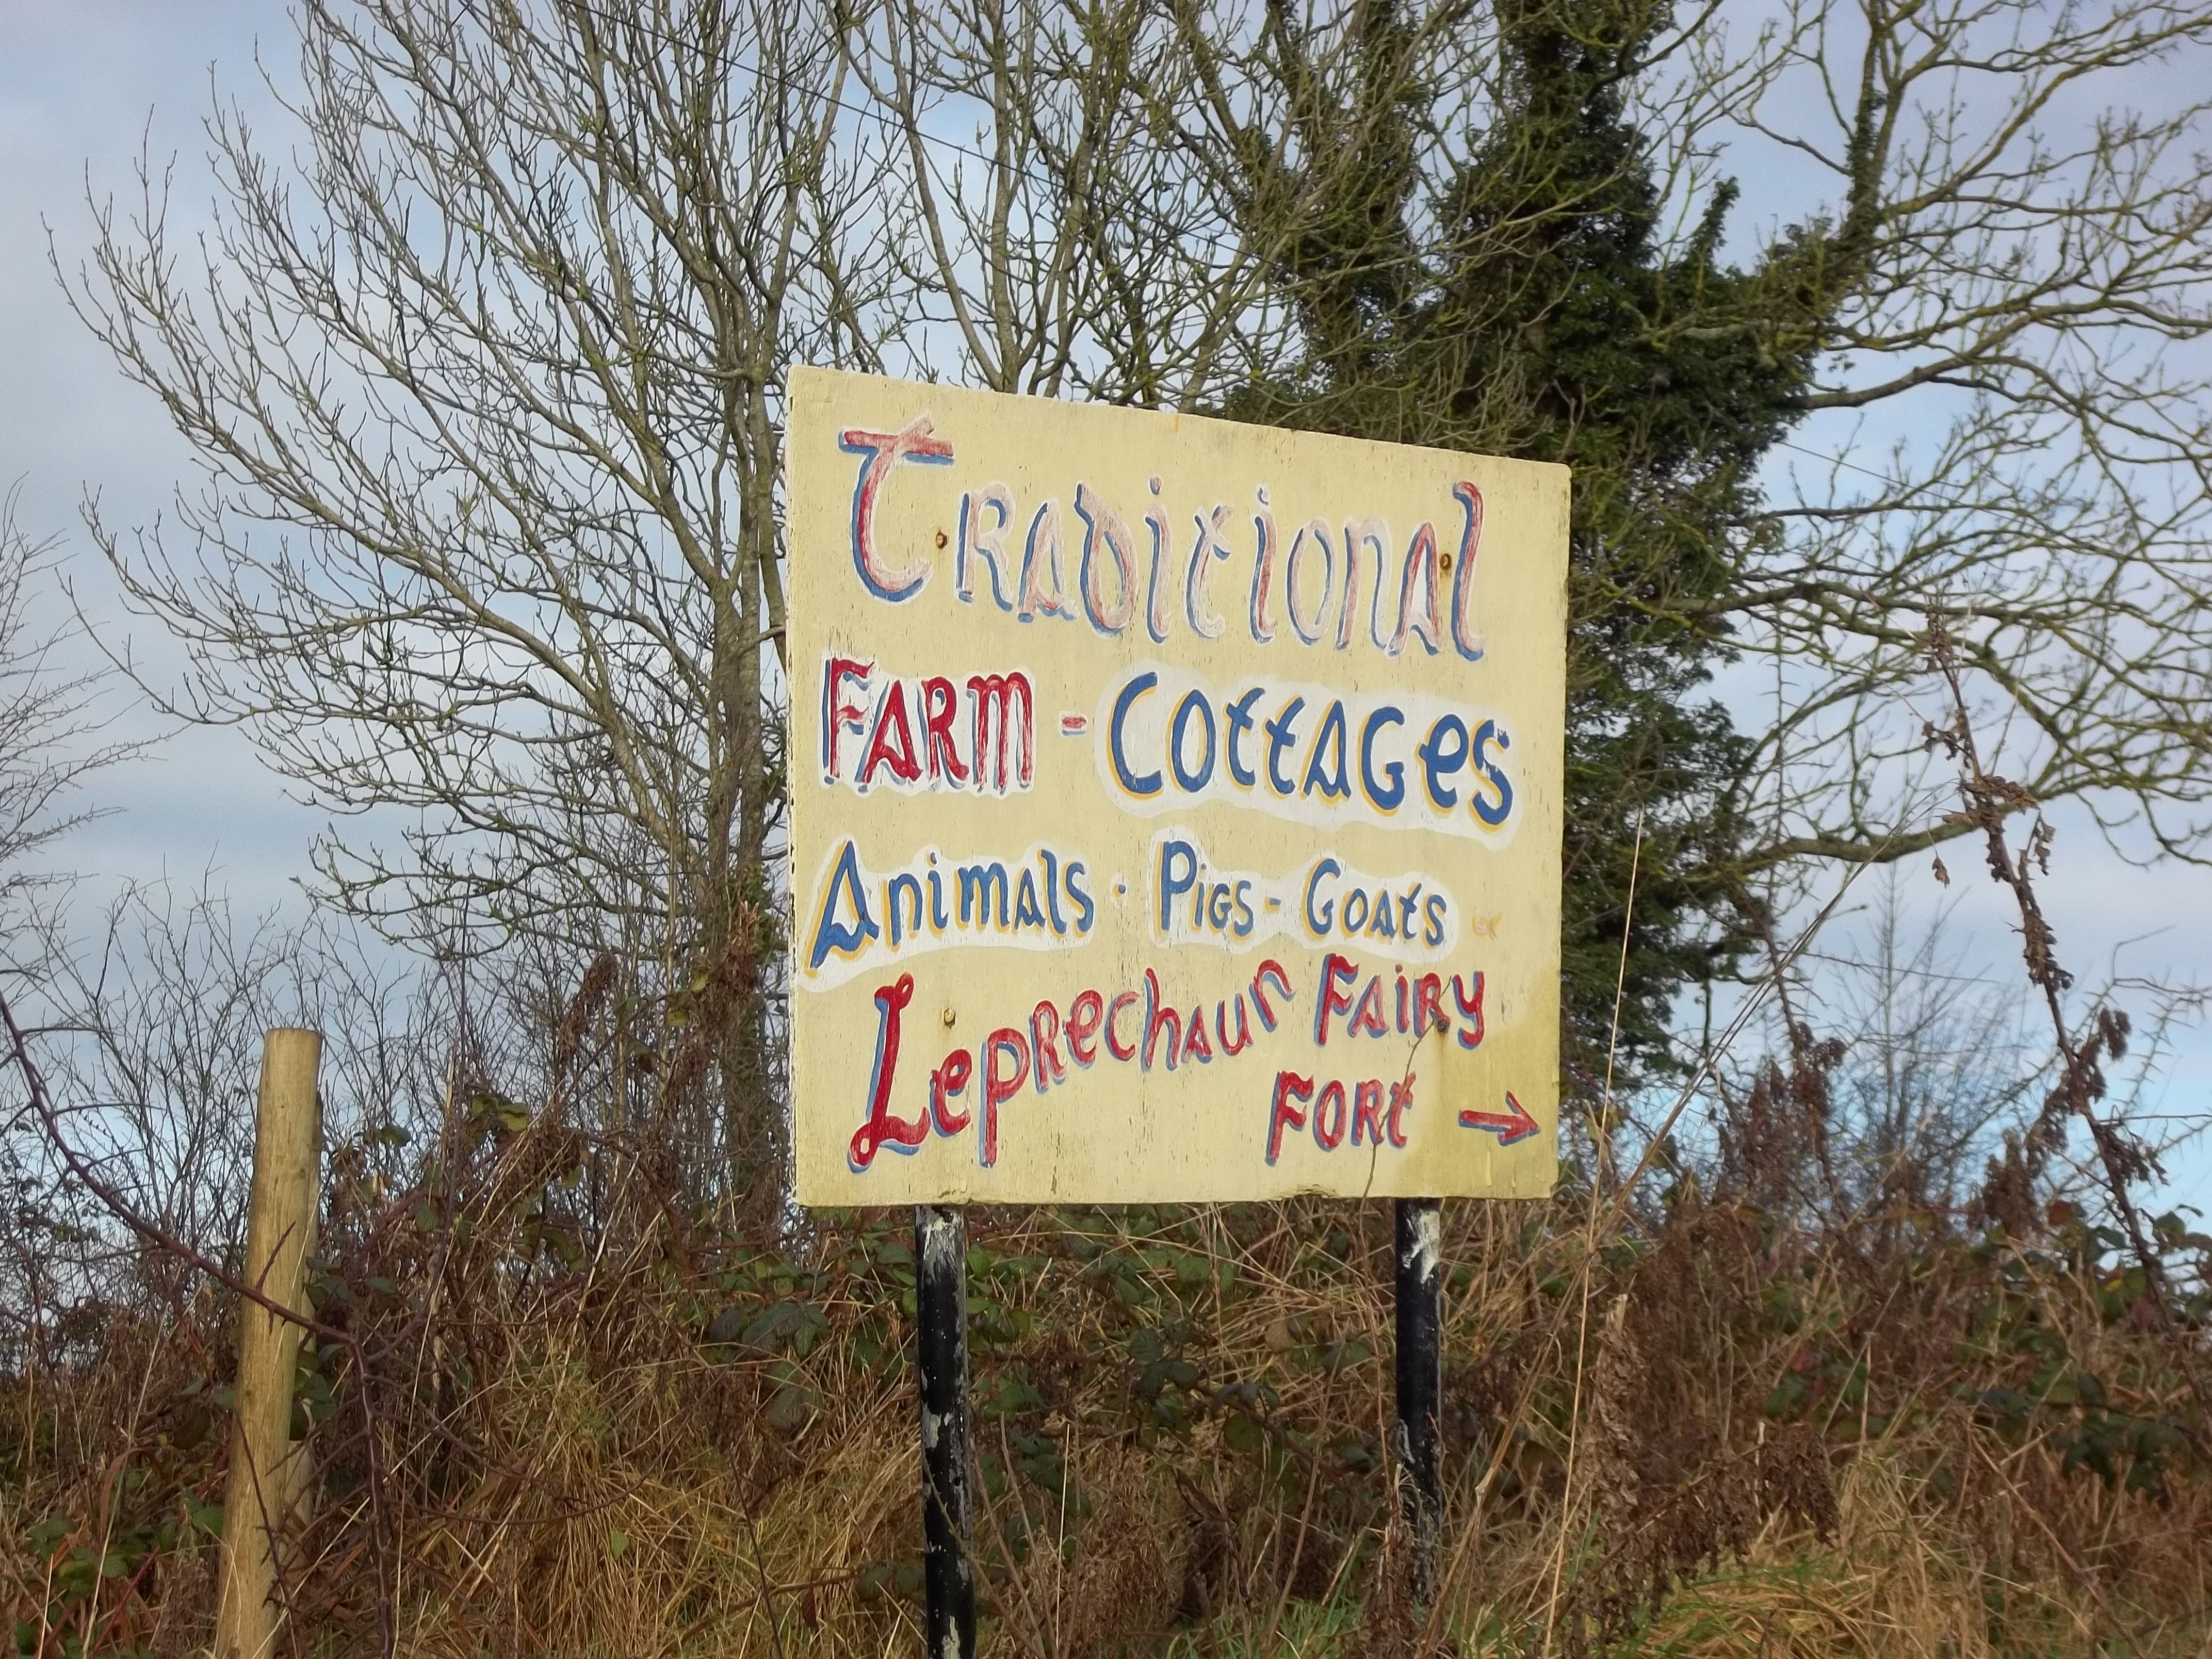 Handpainted Sign for Fairy Fort Farm that is labelled "Traditional Farm, cottages, animals, pies, goats, Leprechaun Fairy Fort"